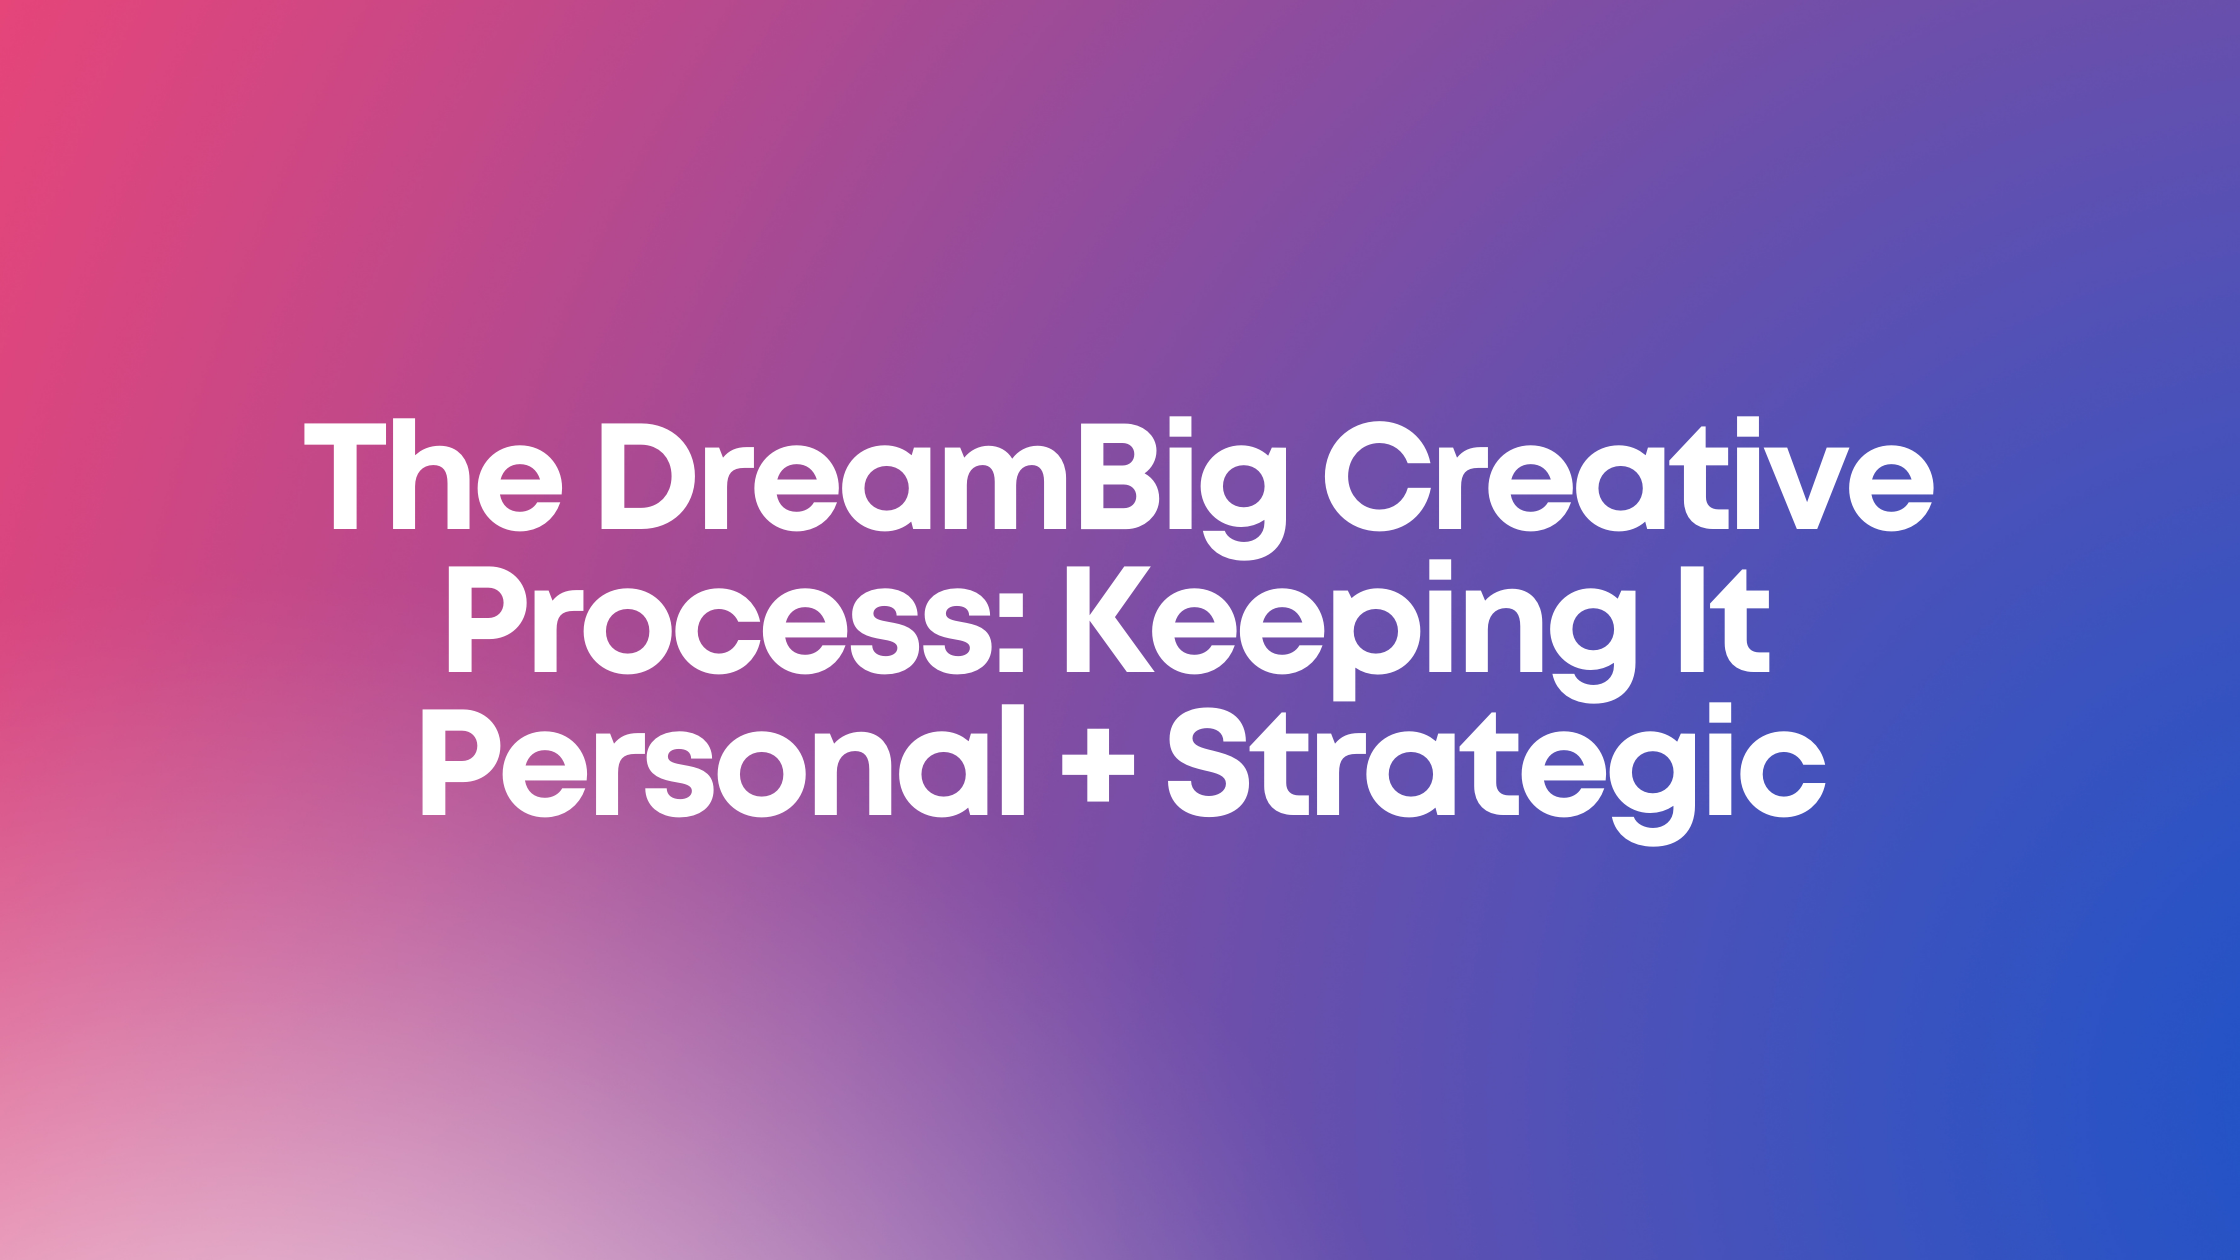 The DreamBig Creative Process: Keeping It Personal + Strategic